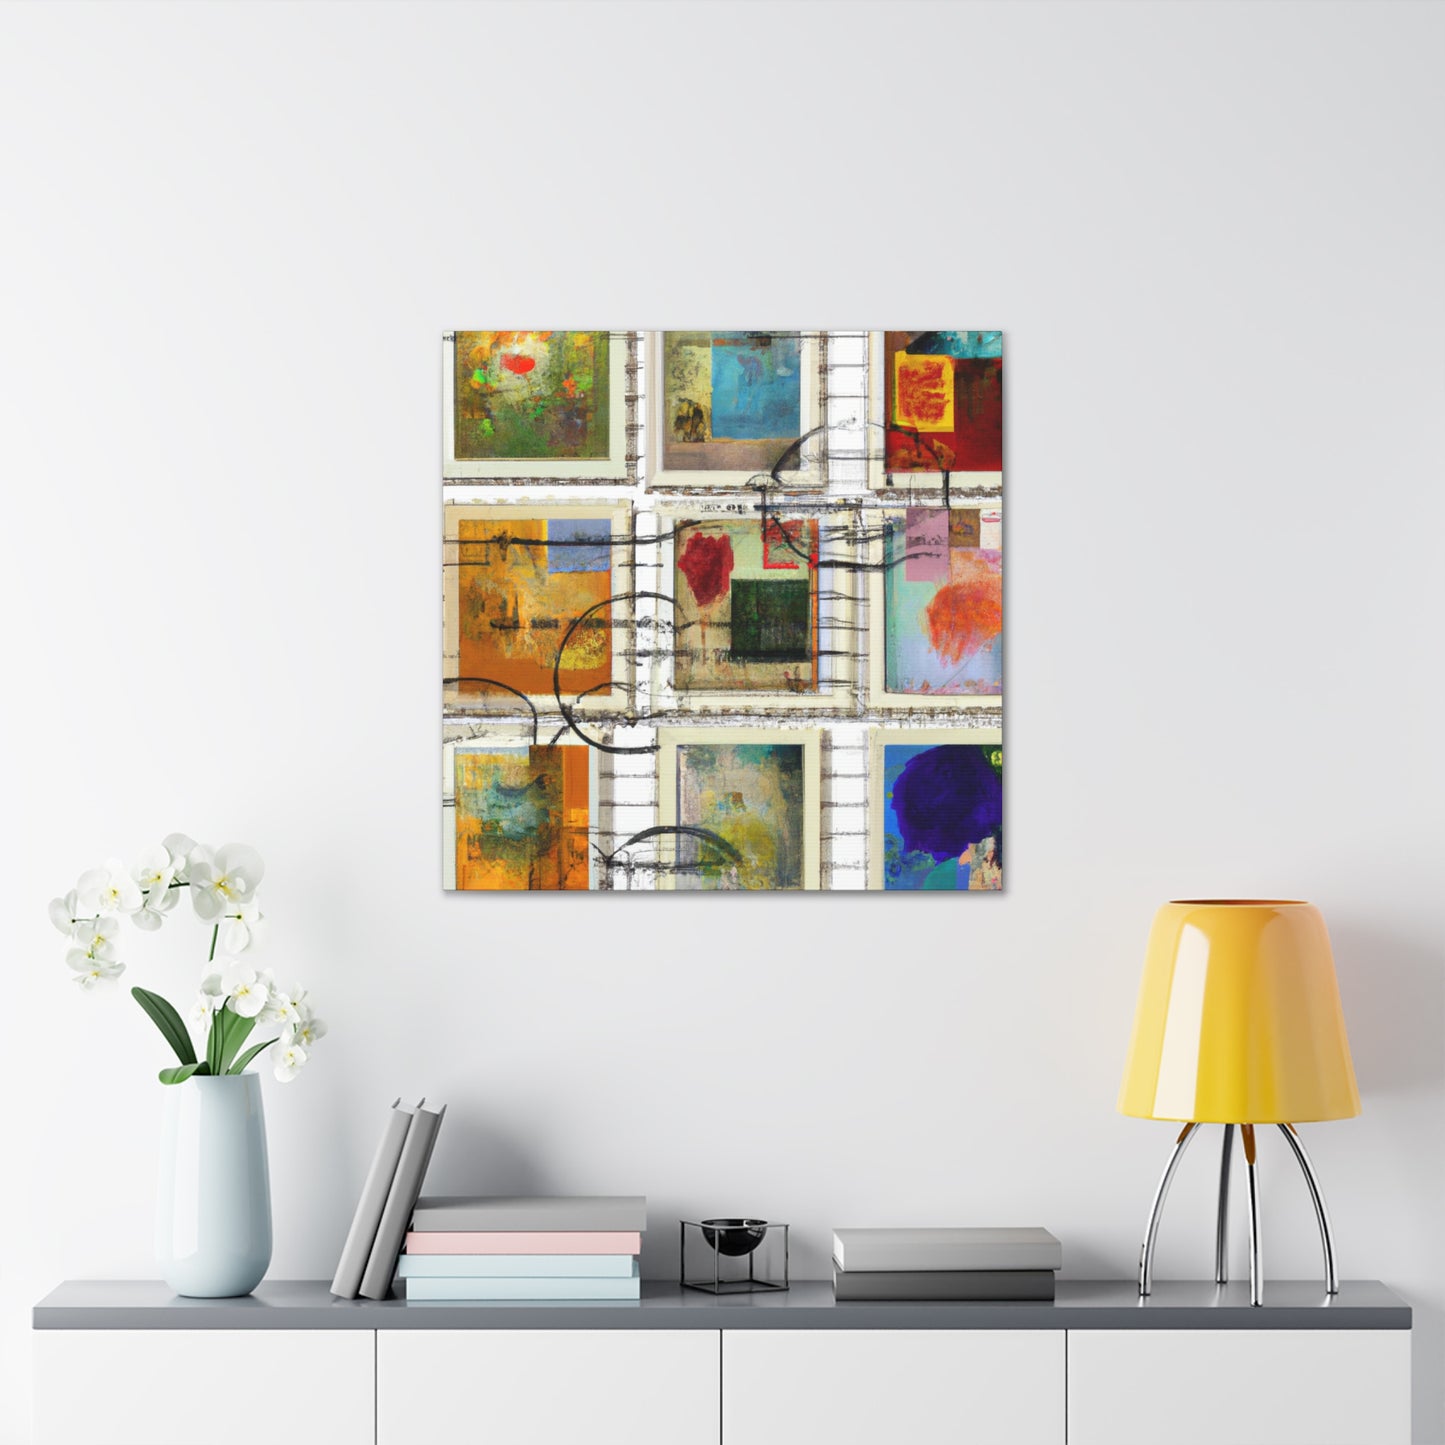 "Cultures and Continents" - Postage Stamp Collector Canvas Wall Art